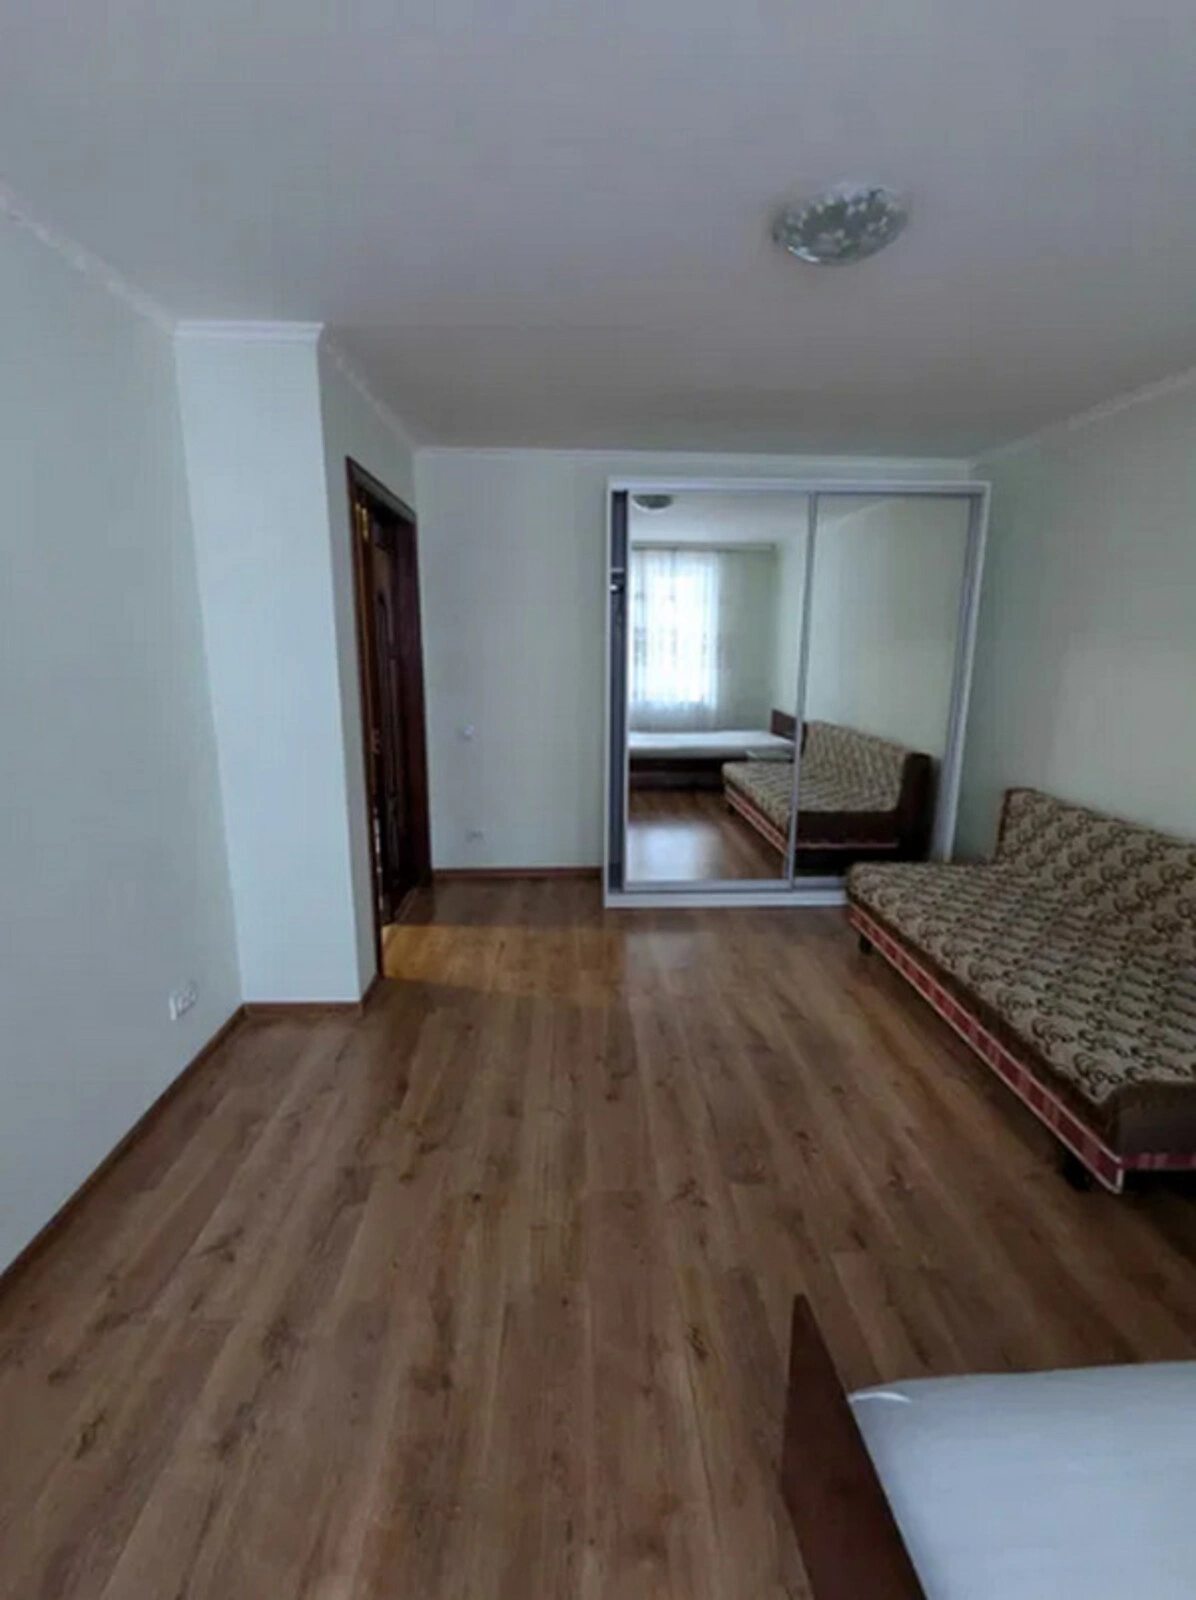 Apartments for sale. 2 rooms, 68 m², 2nd floor/10 floors. Bam, Ternopil. 